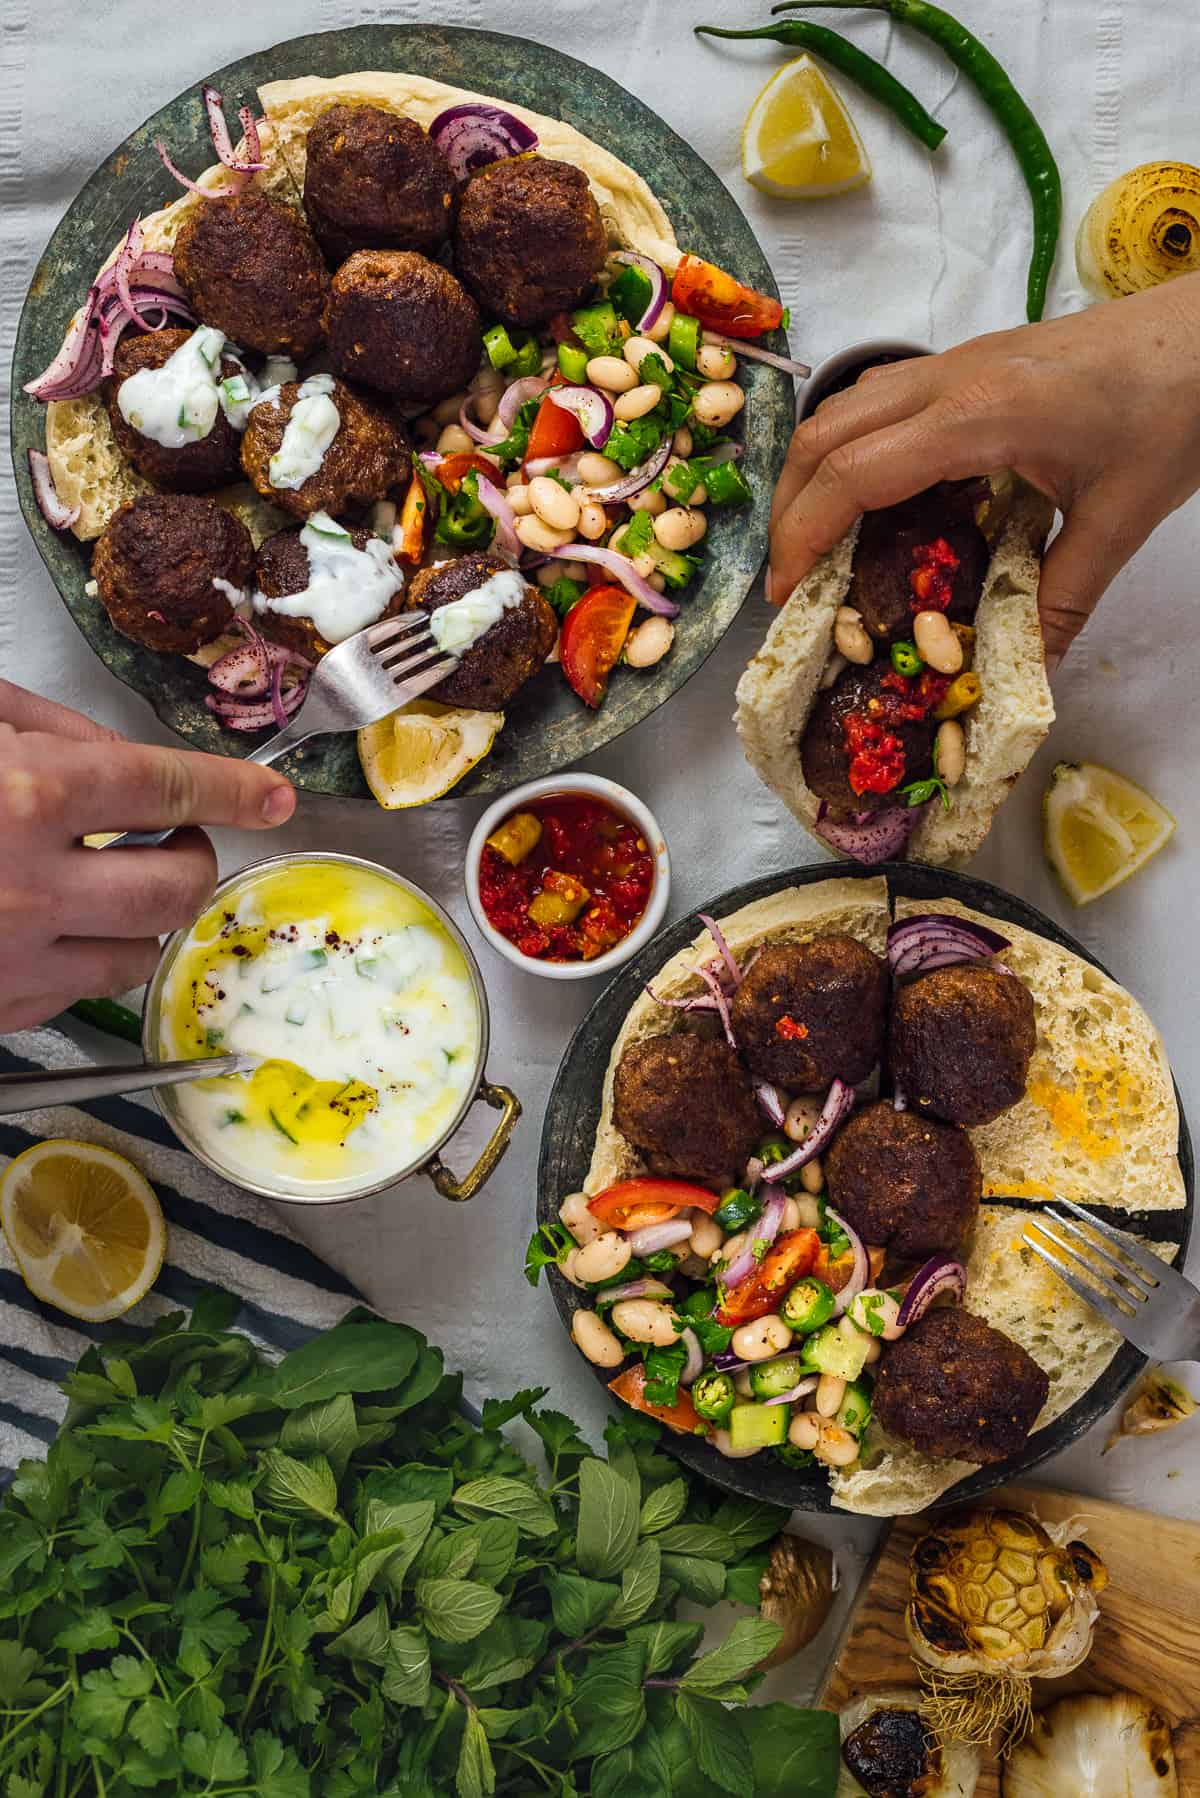 Hands taking Turkish meatballs from two plates accompanied by herbs, bean salad, yogurt dip and flat breads.